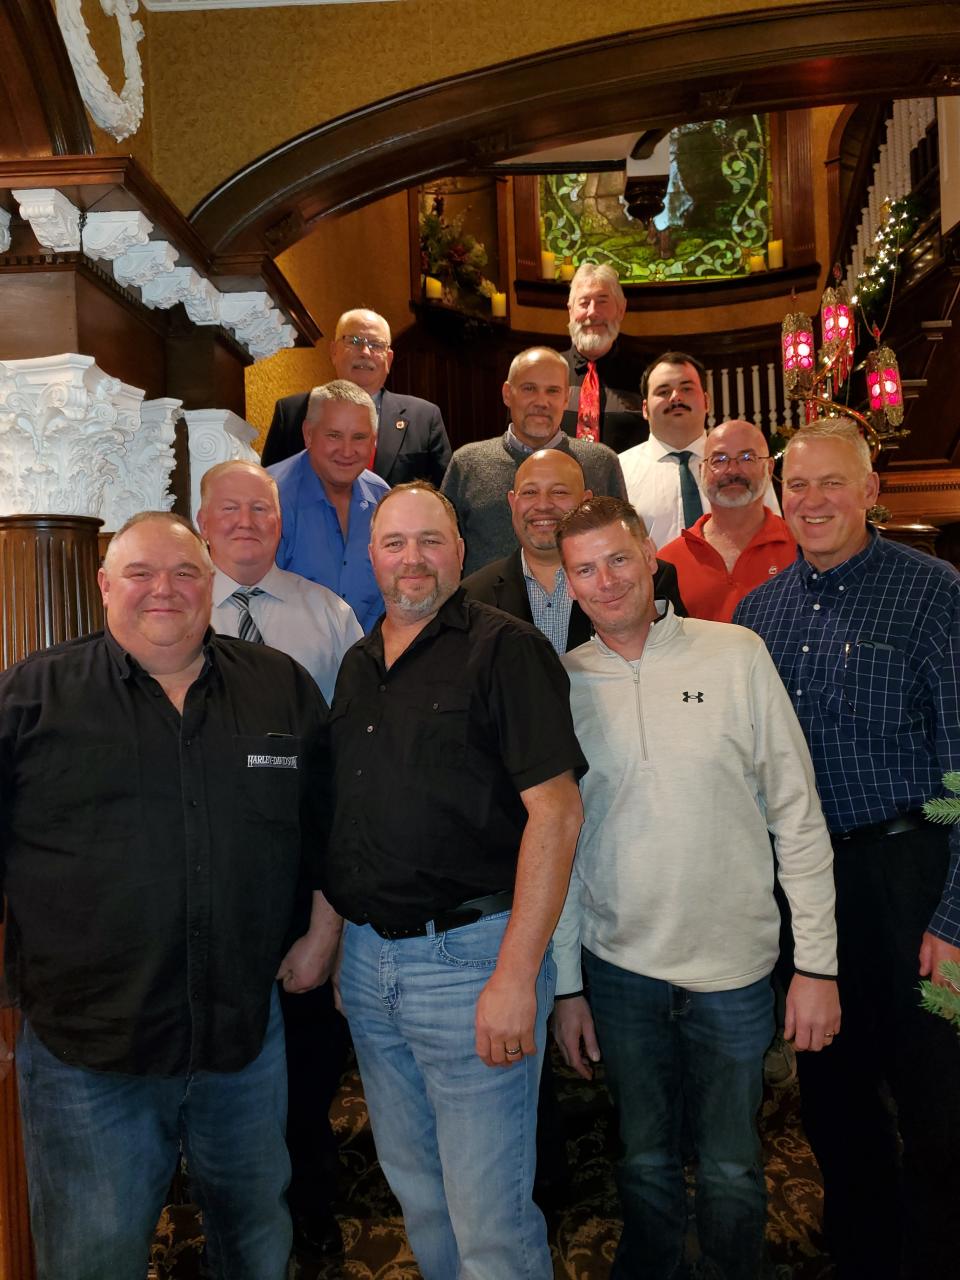 Members of the Mahoning County Fire Chiefs Association gathered Friday, Dec. 2, 2022, at the Sebring Mansion Inn and Spa for the group's annual meeting and Christmas Party.